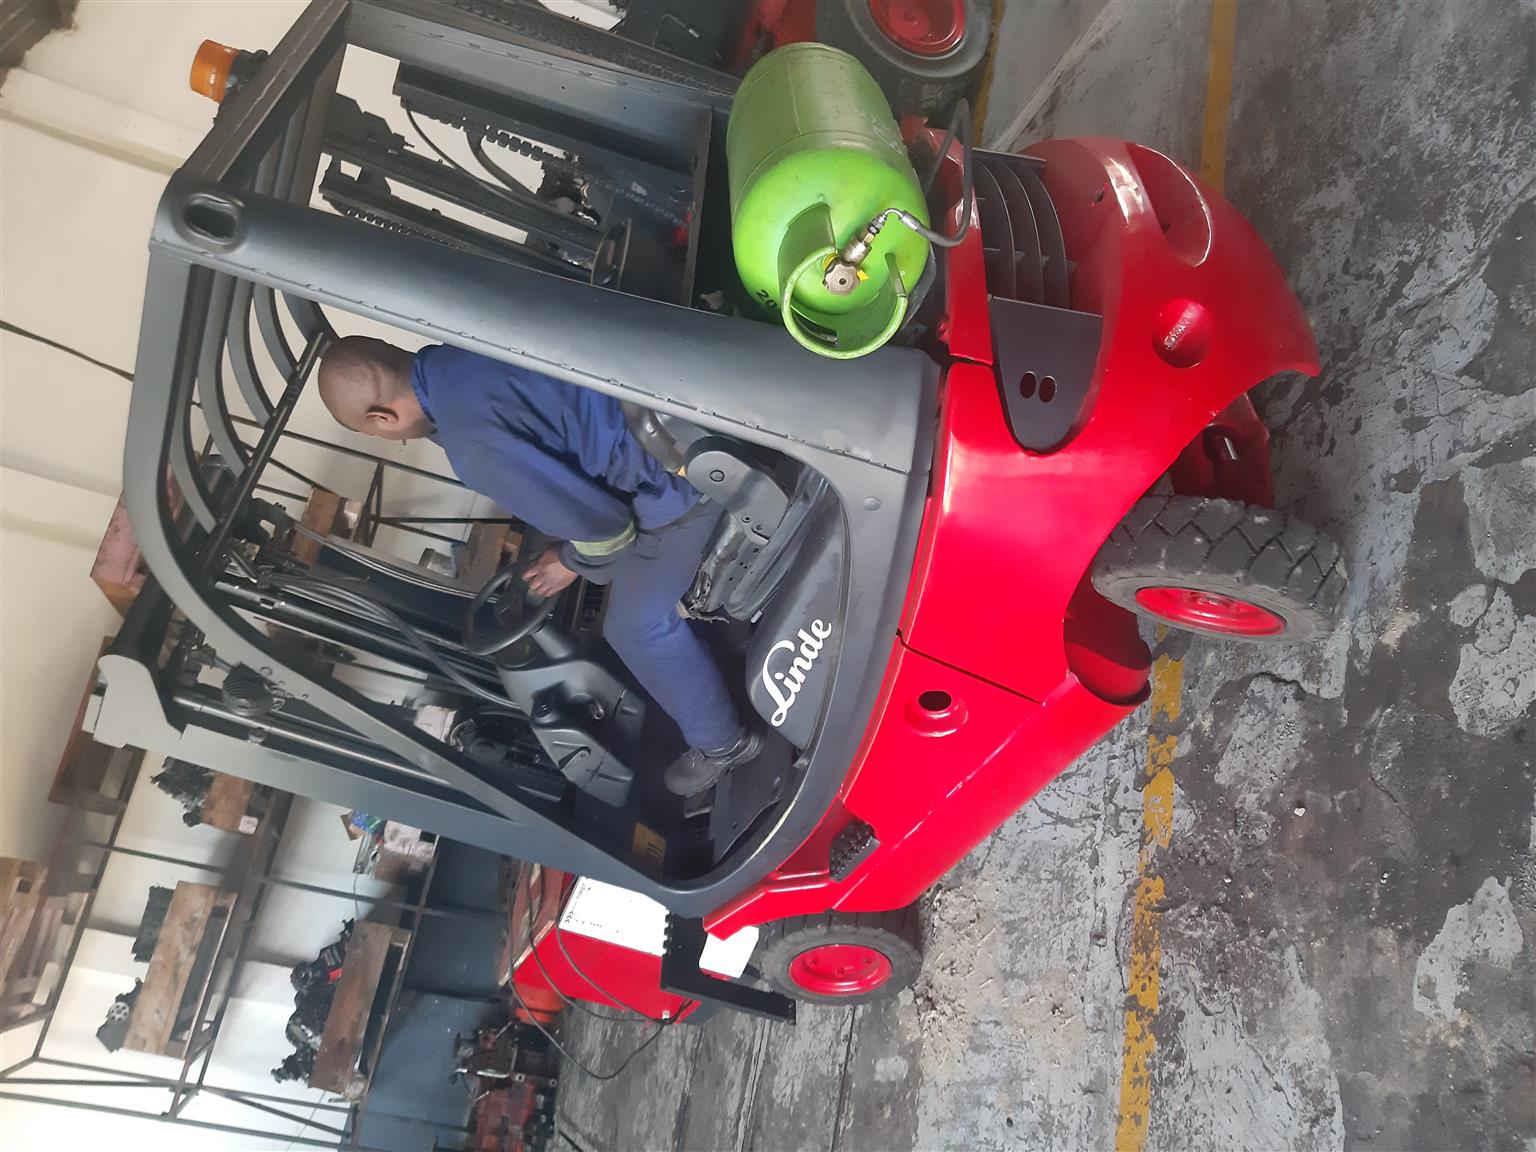 GOOD CONDITION 1.8 TON LINDE GAS FORKLIFTS FOR SALE 